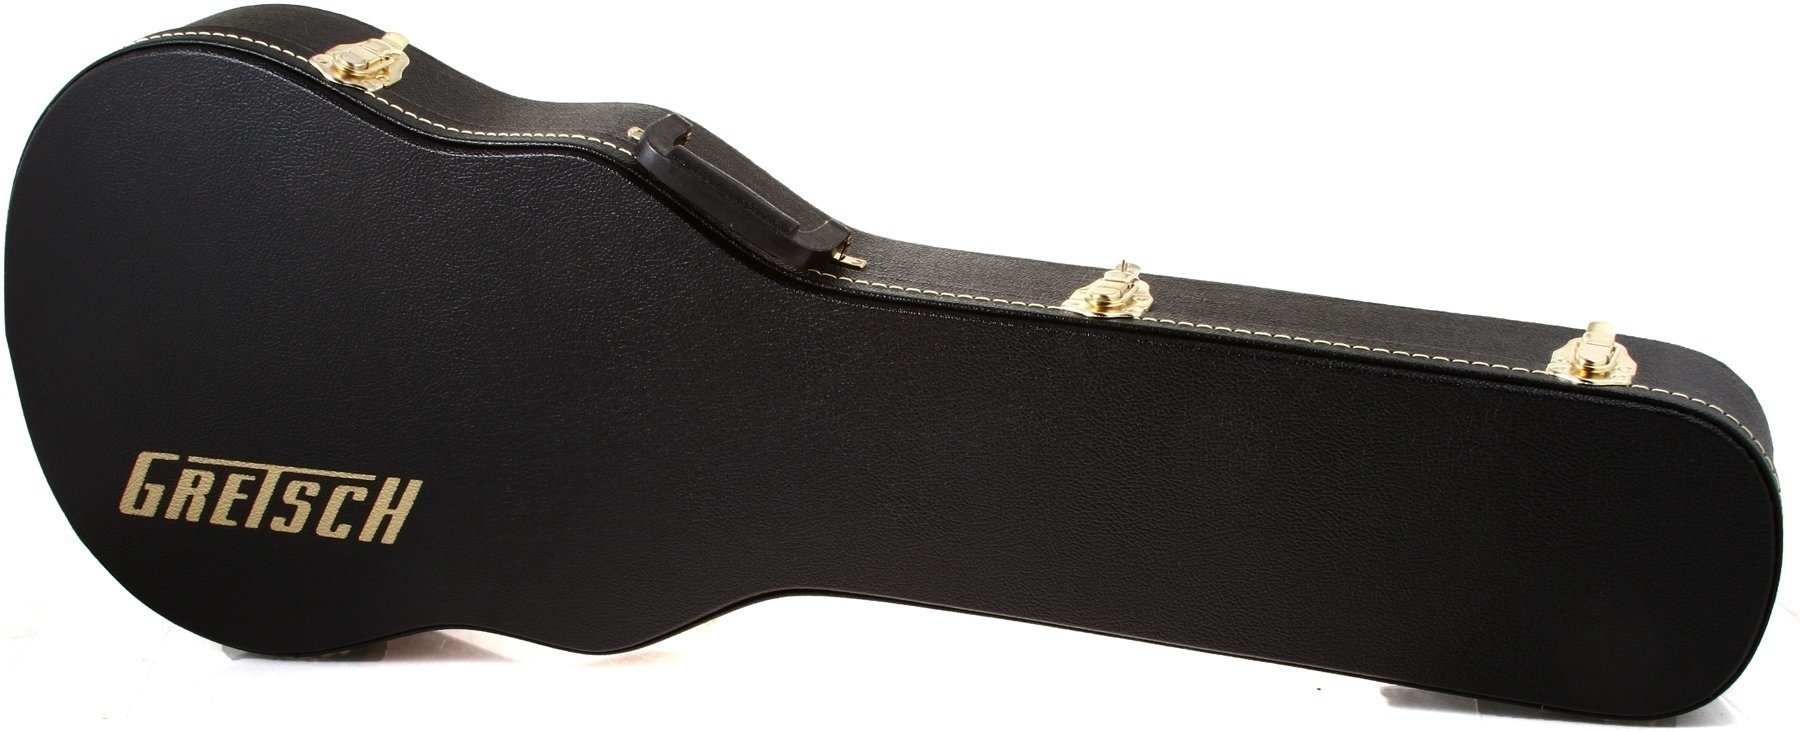 Case for Electric Guitar Gretsch G6238